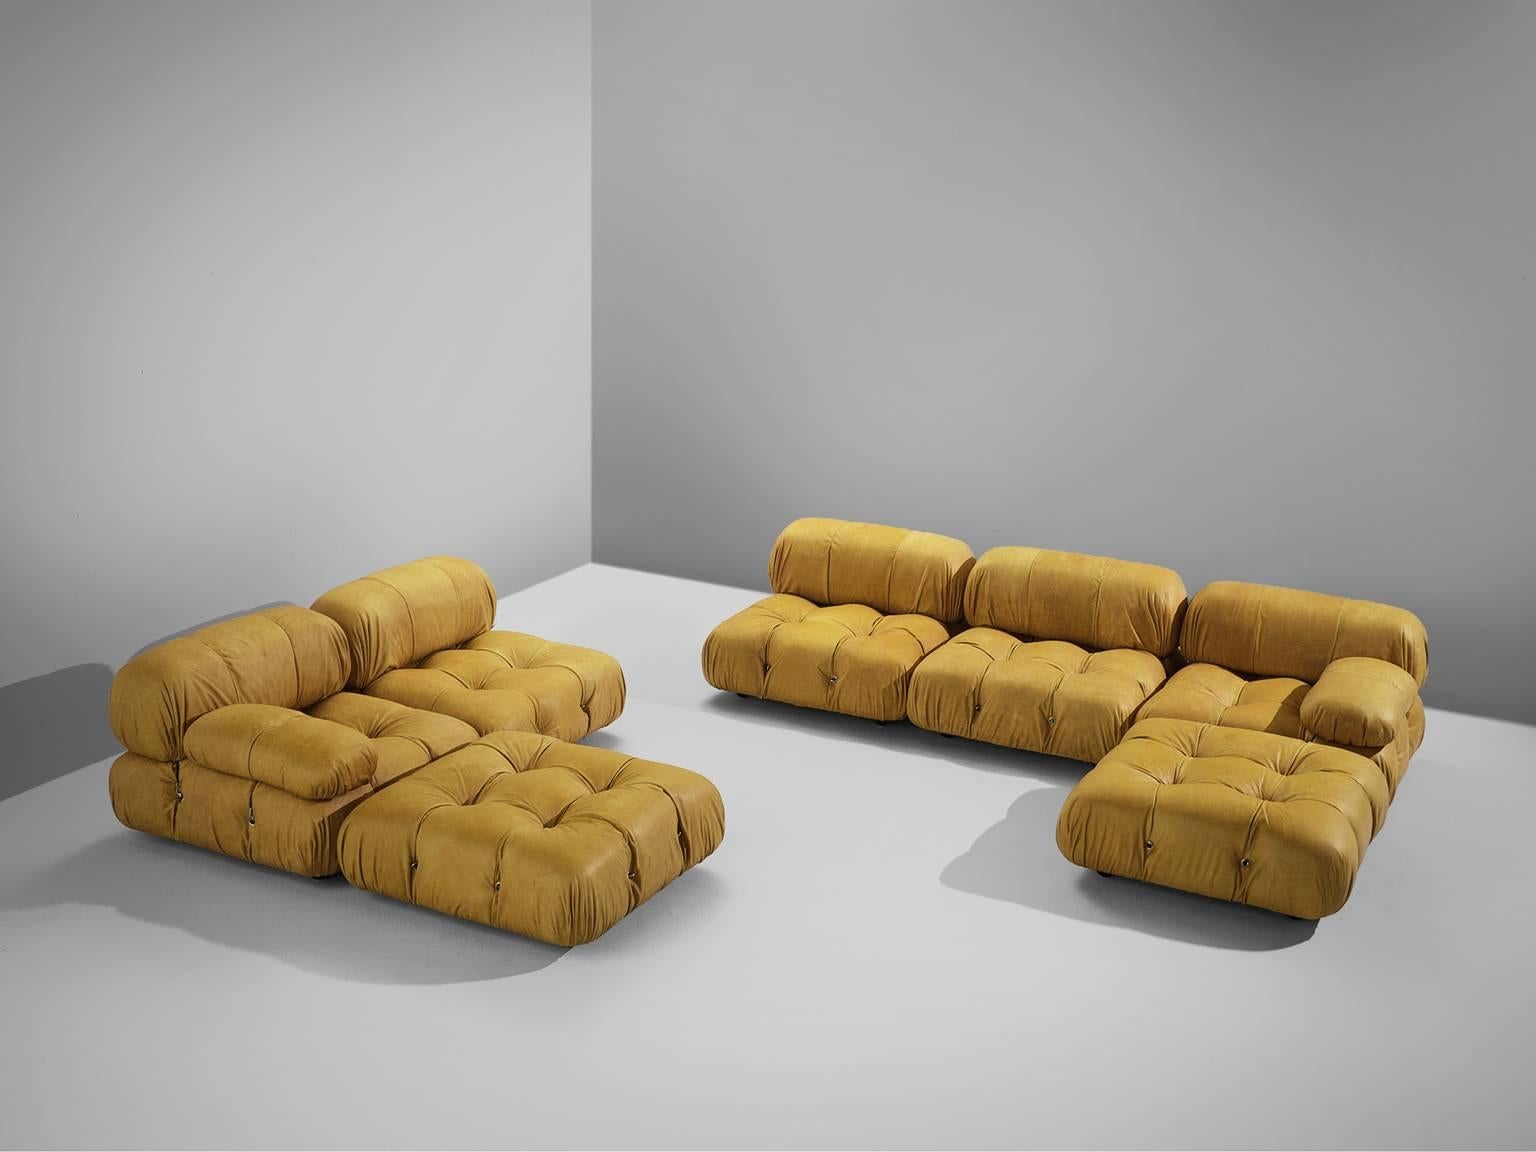 Mario Bellini, large modular 'Cameleonda' sofa, cognac leather upholstery, Italy, 1971, reupholstered by our in-house upholstery atelier. 

The sectional elements this sofa was made with can be used freely and apart from one another. The backs and